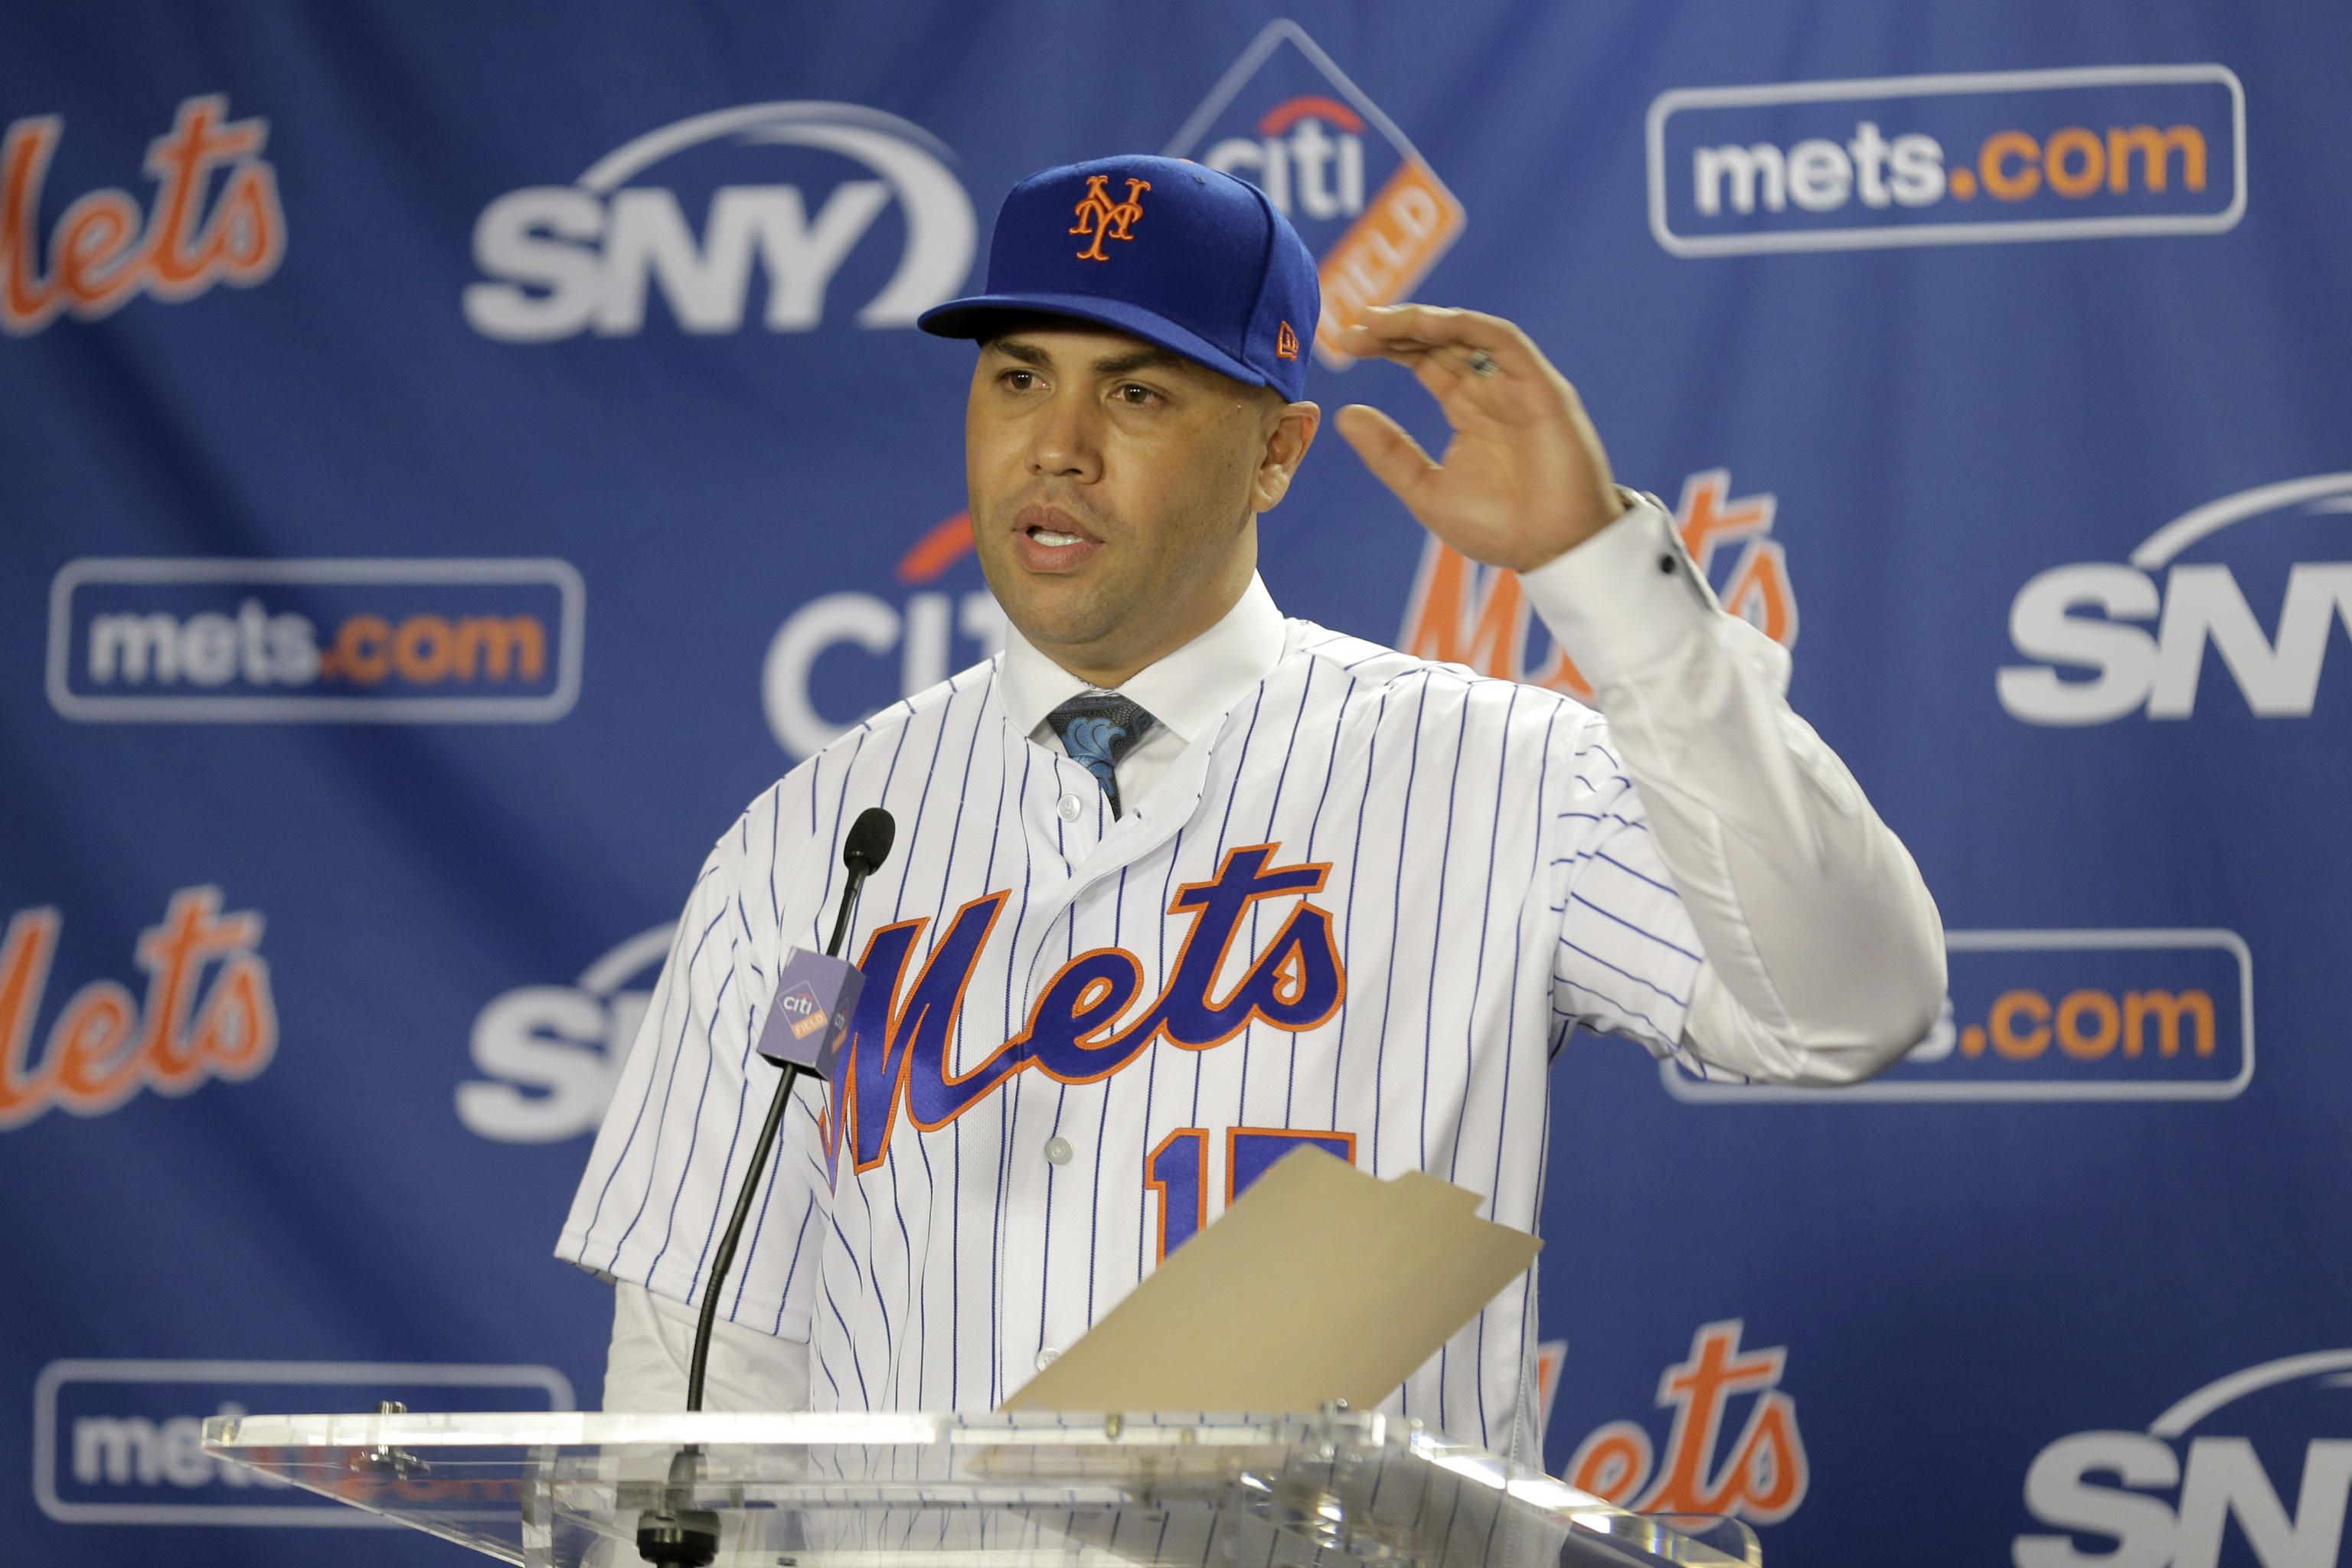 Mets Rumors: Luis Rojas Considered for Manager After Carlos Beltran Steps Down